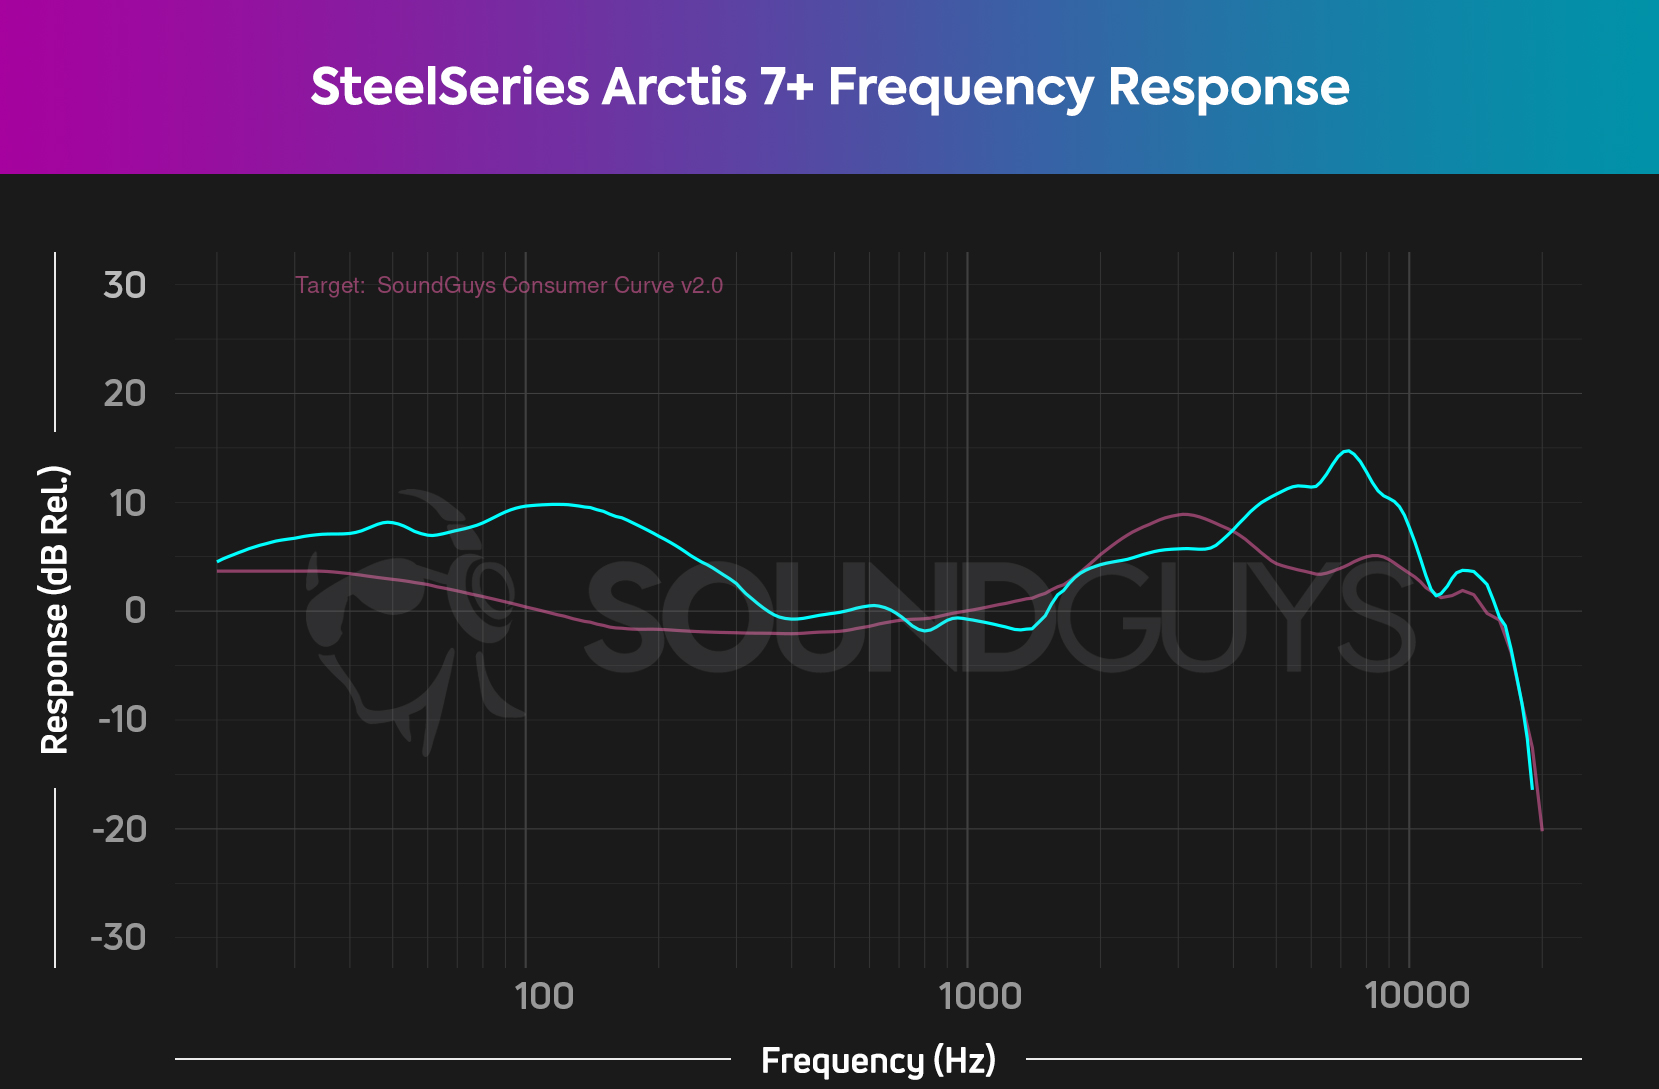 A frequency response chart for the SteelSeries Arctis 7+, which shows dramatically emphasized bass and mid range sound.